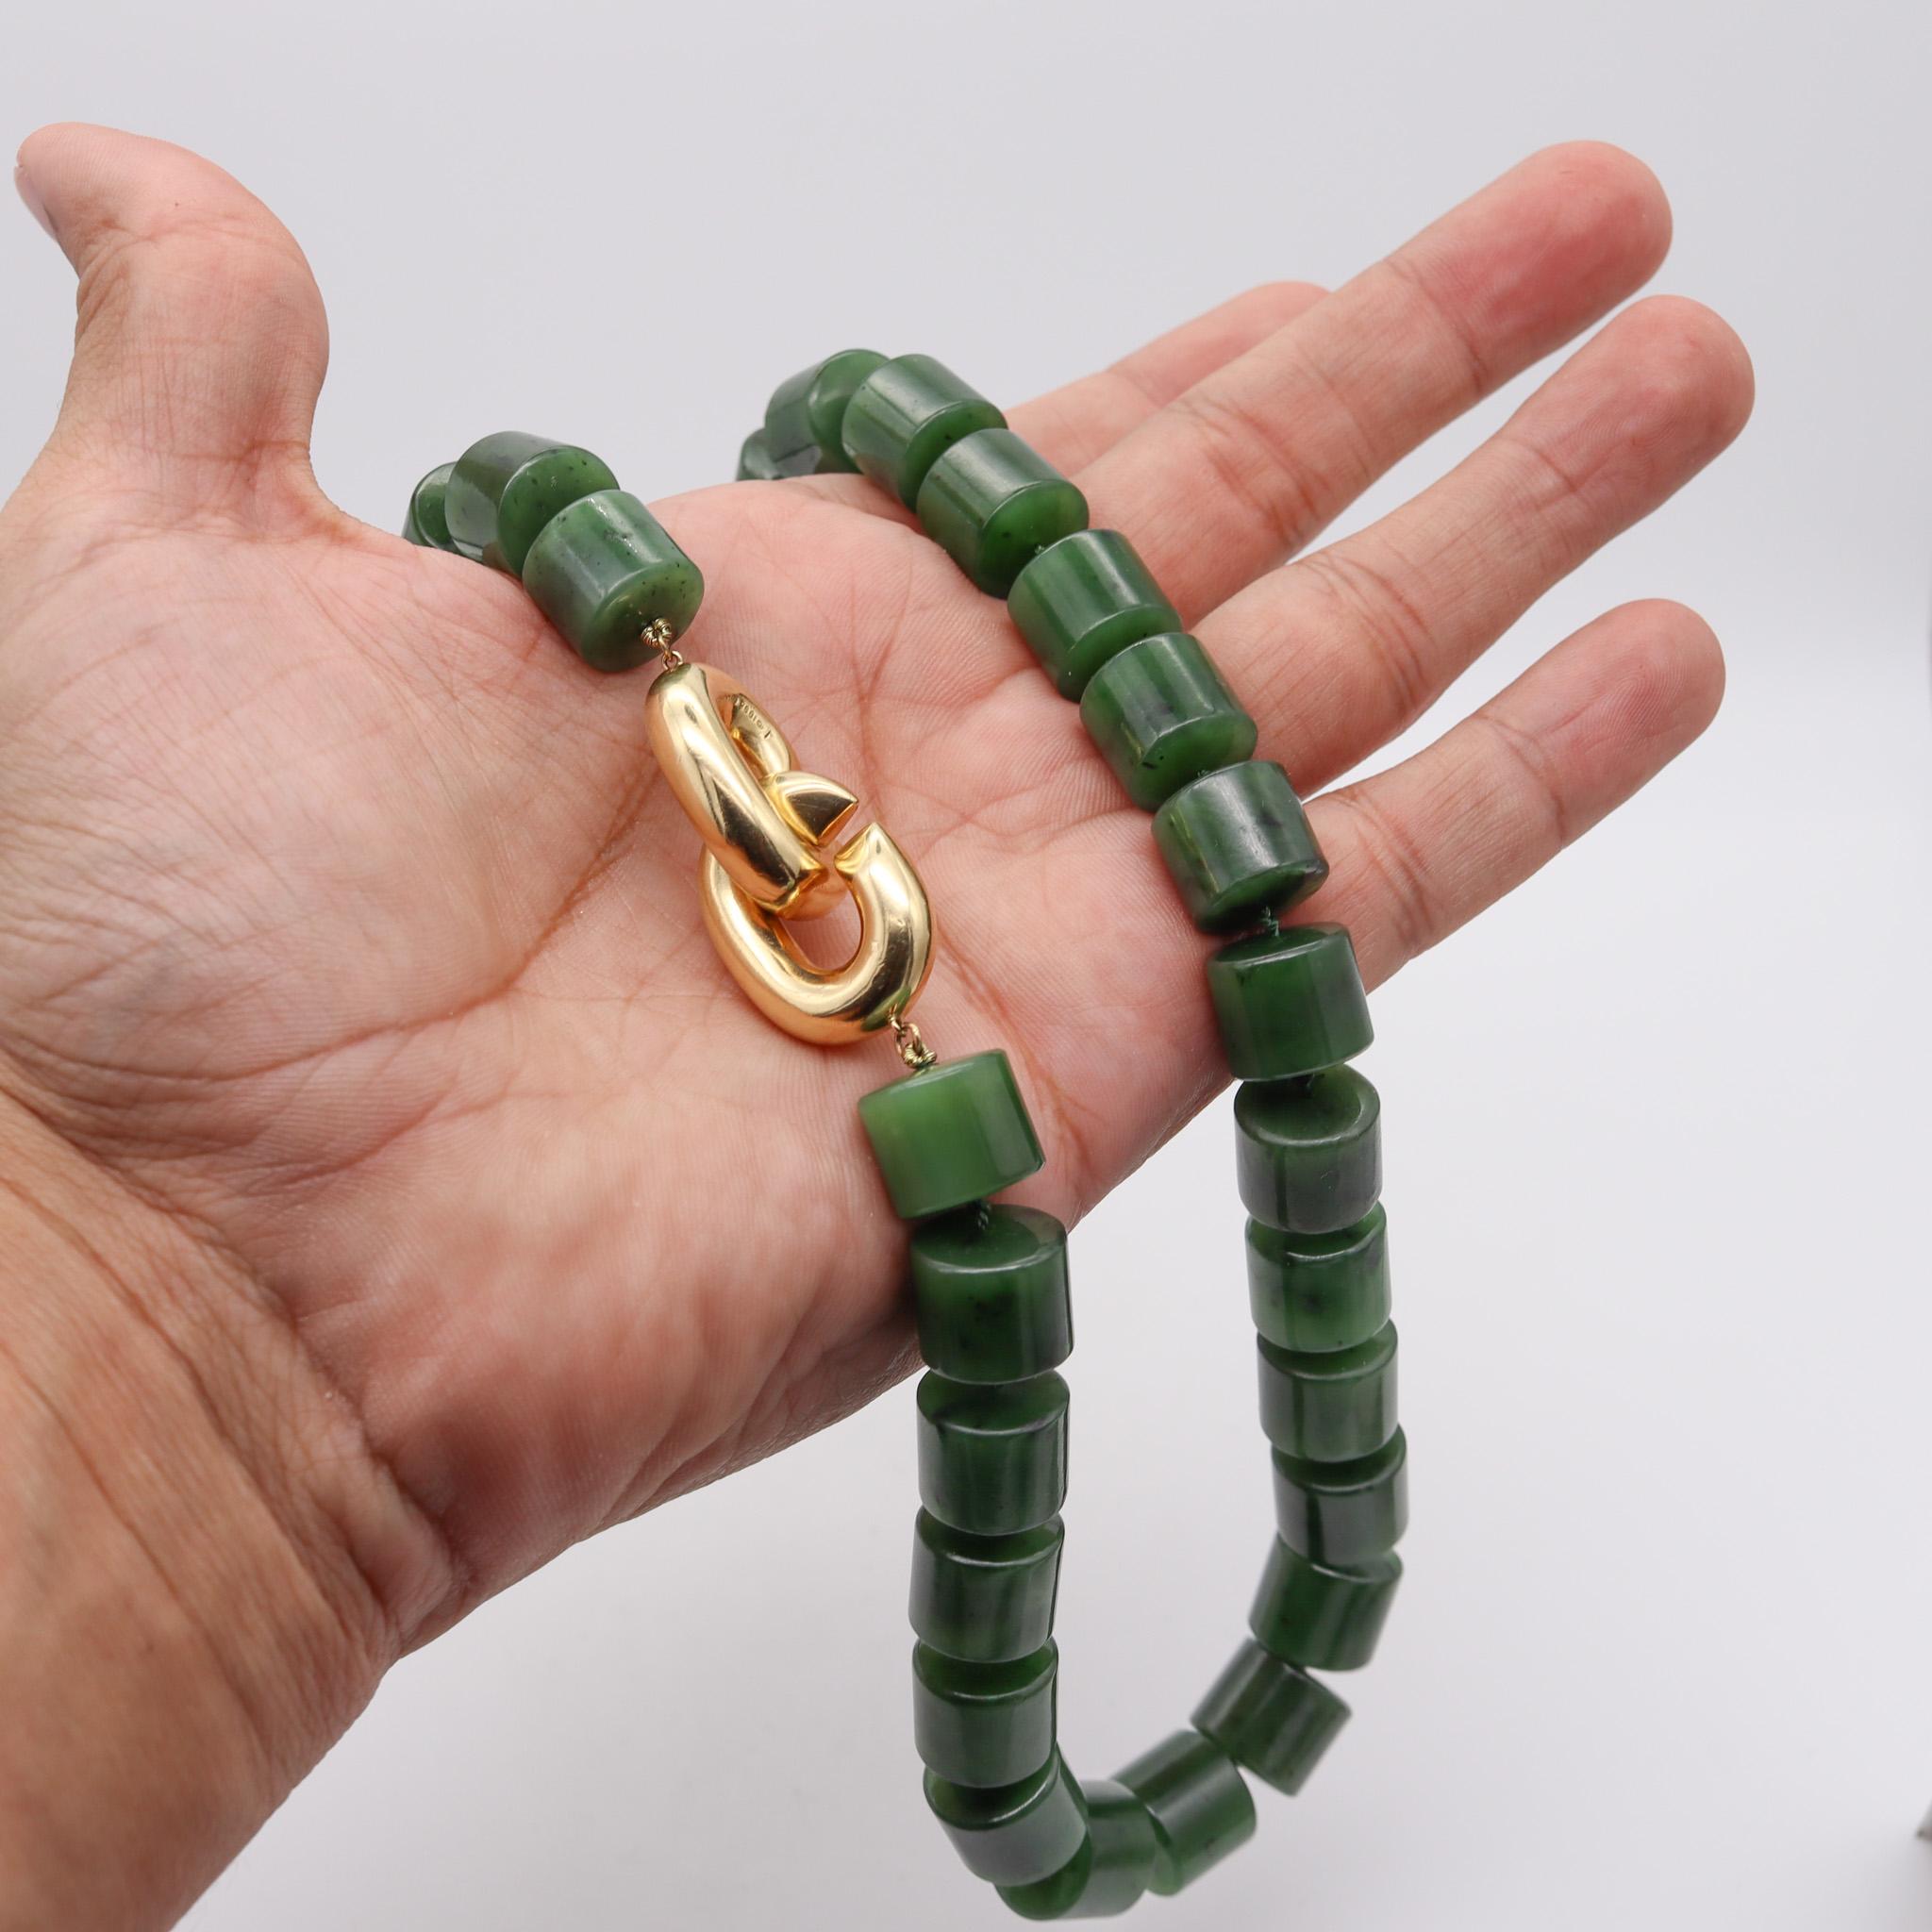 Cabochon Angela Cummings 1993 Nephrite Green Jade Necklace with 18kt Yellow Gold Mounting For Sale